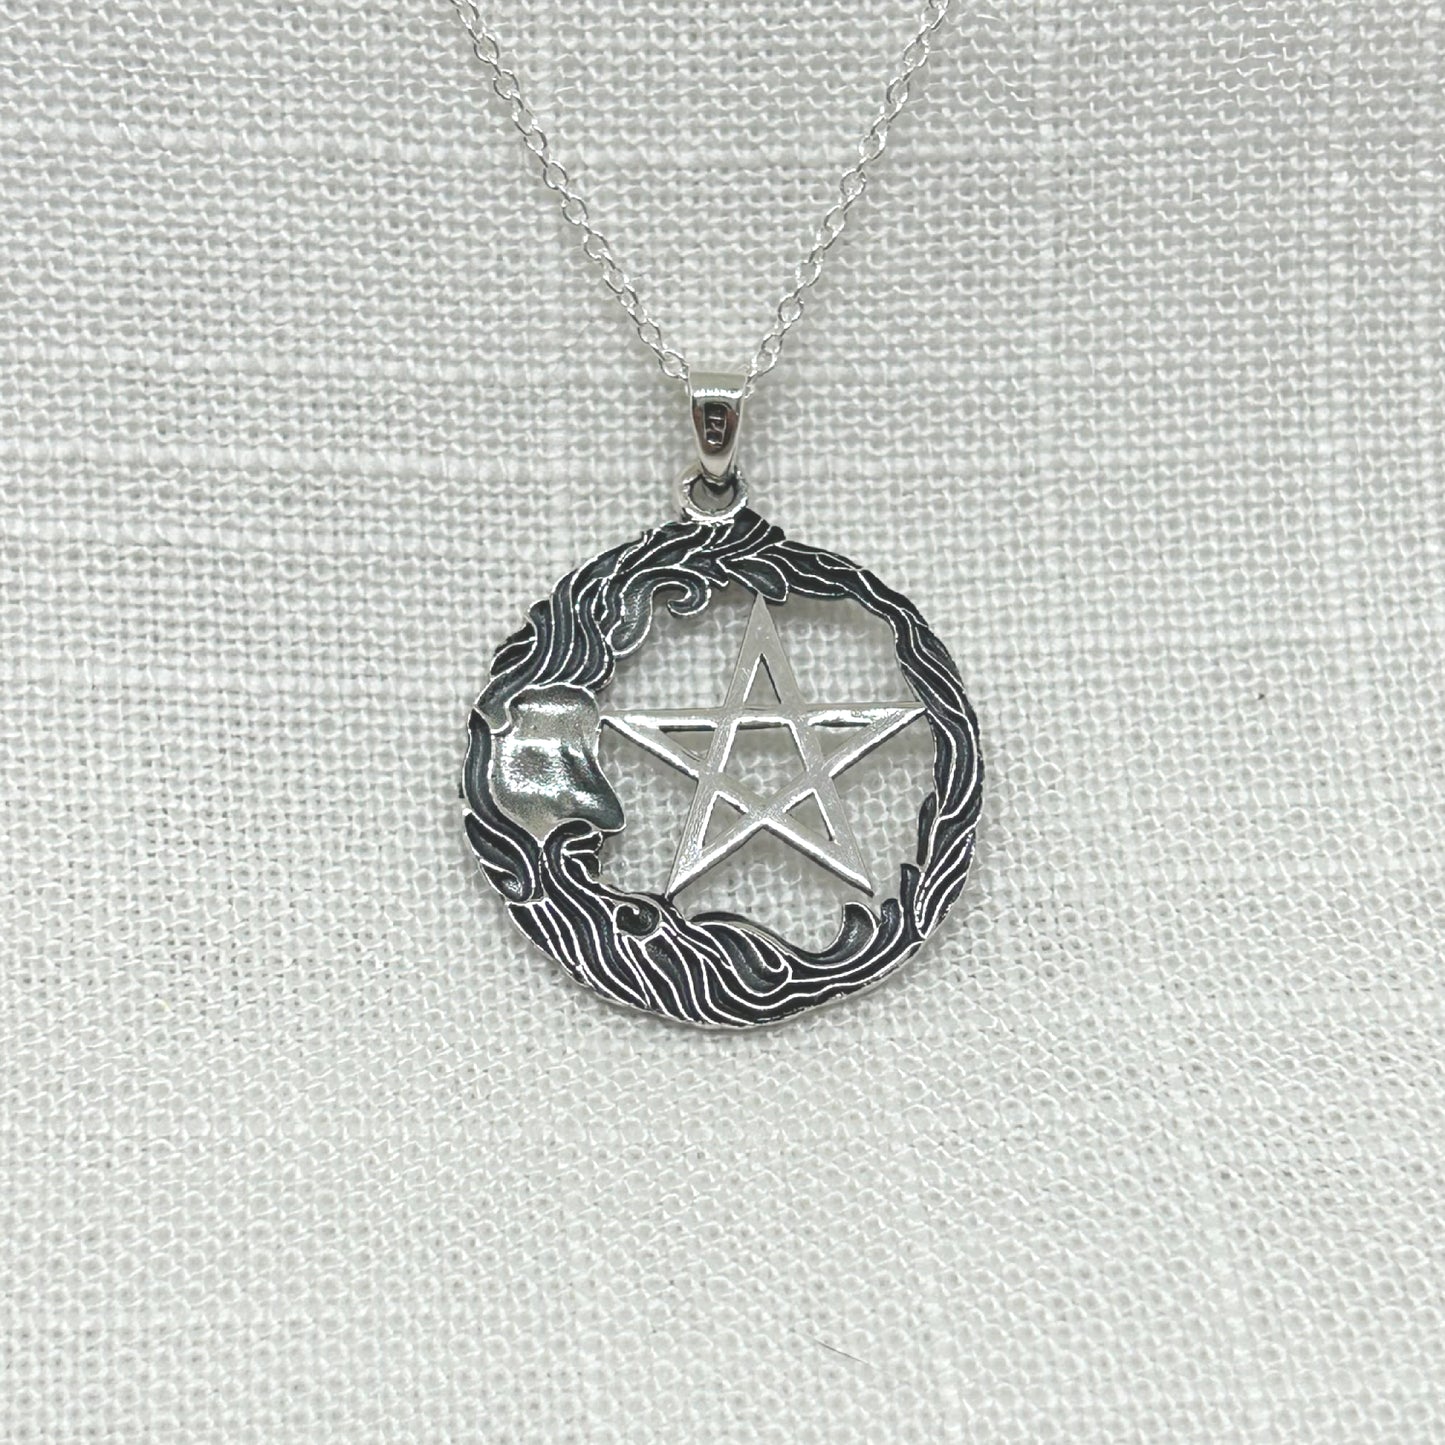 Sterling Silver Wise Man Pentagram Necklace **ON SALE** WAS 29.99 NOW 25.99